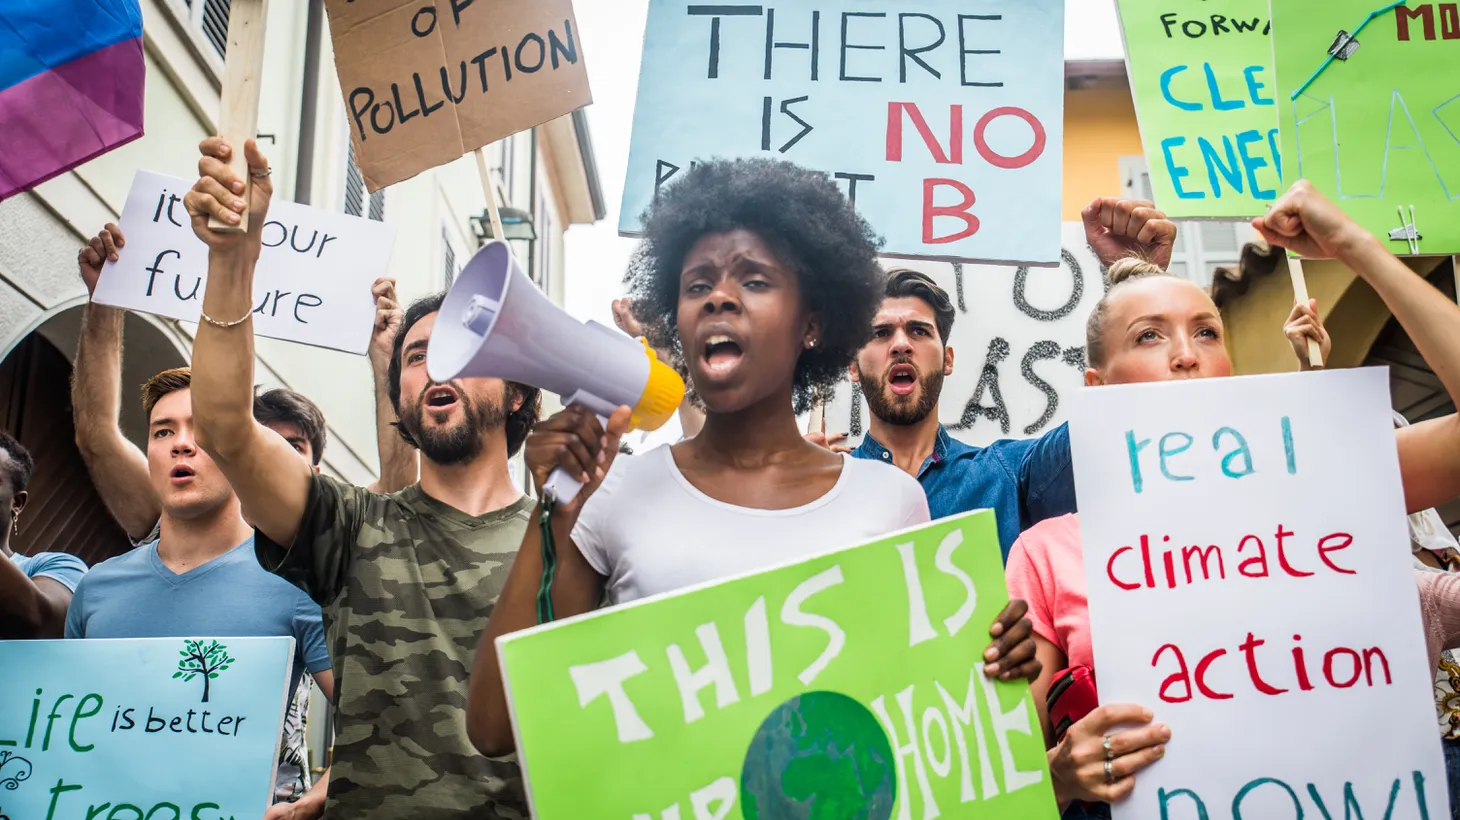 Some environment activists are turning to unconventional methods to put more pressure on elected officials in hopes of making substantive changes to climate change.